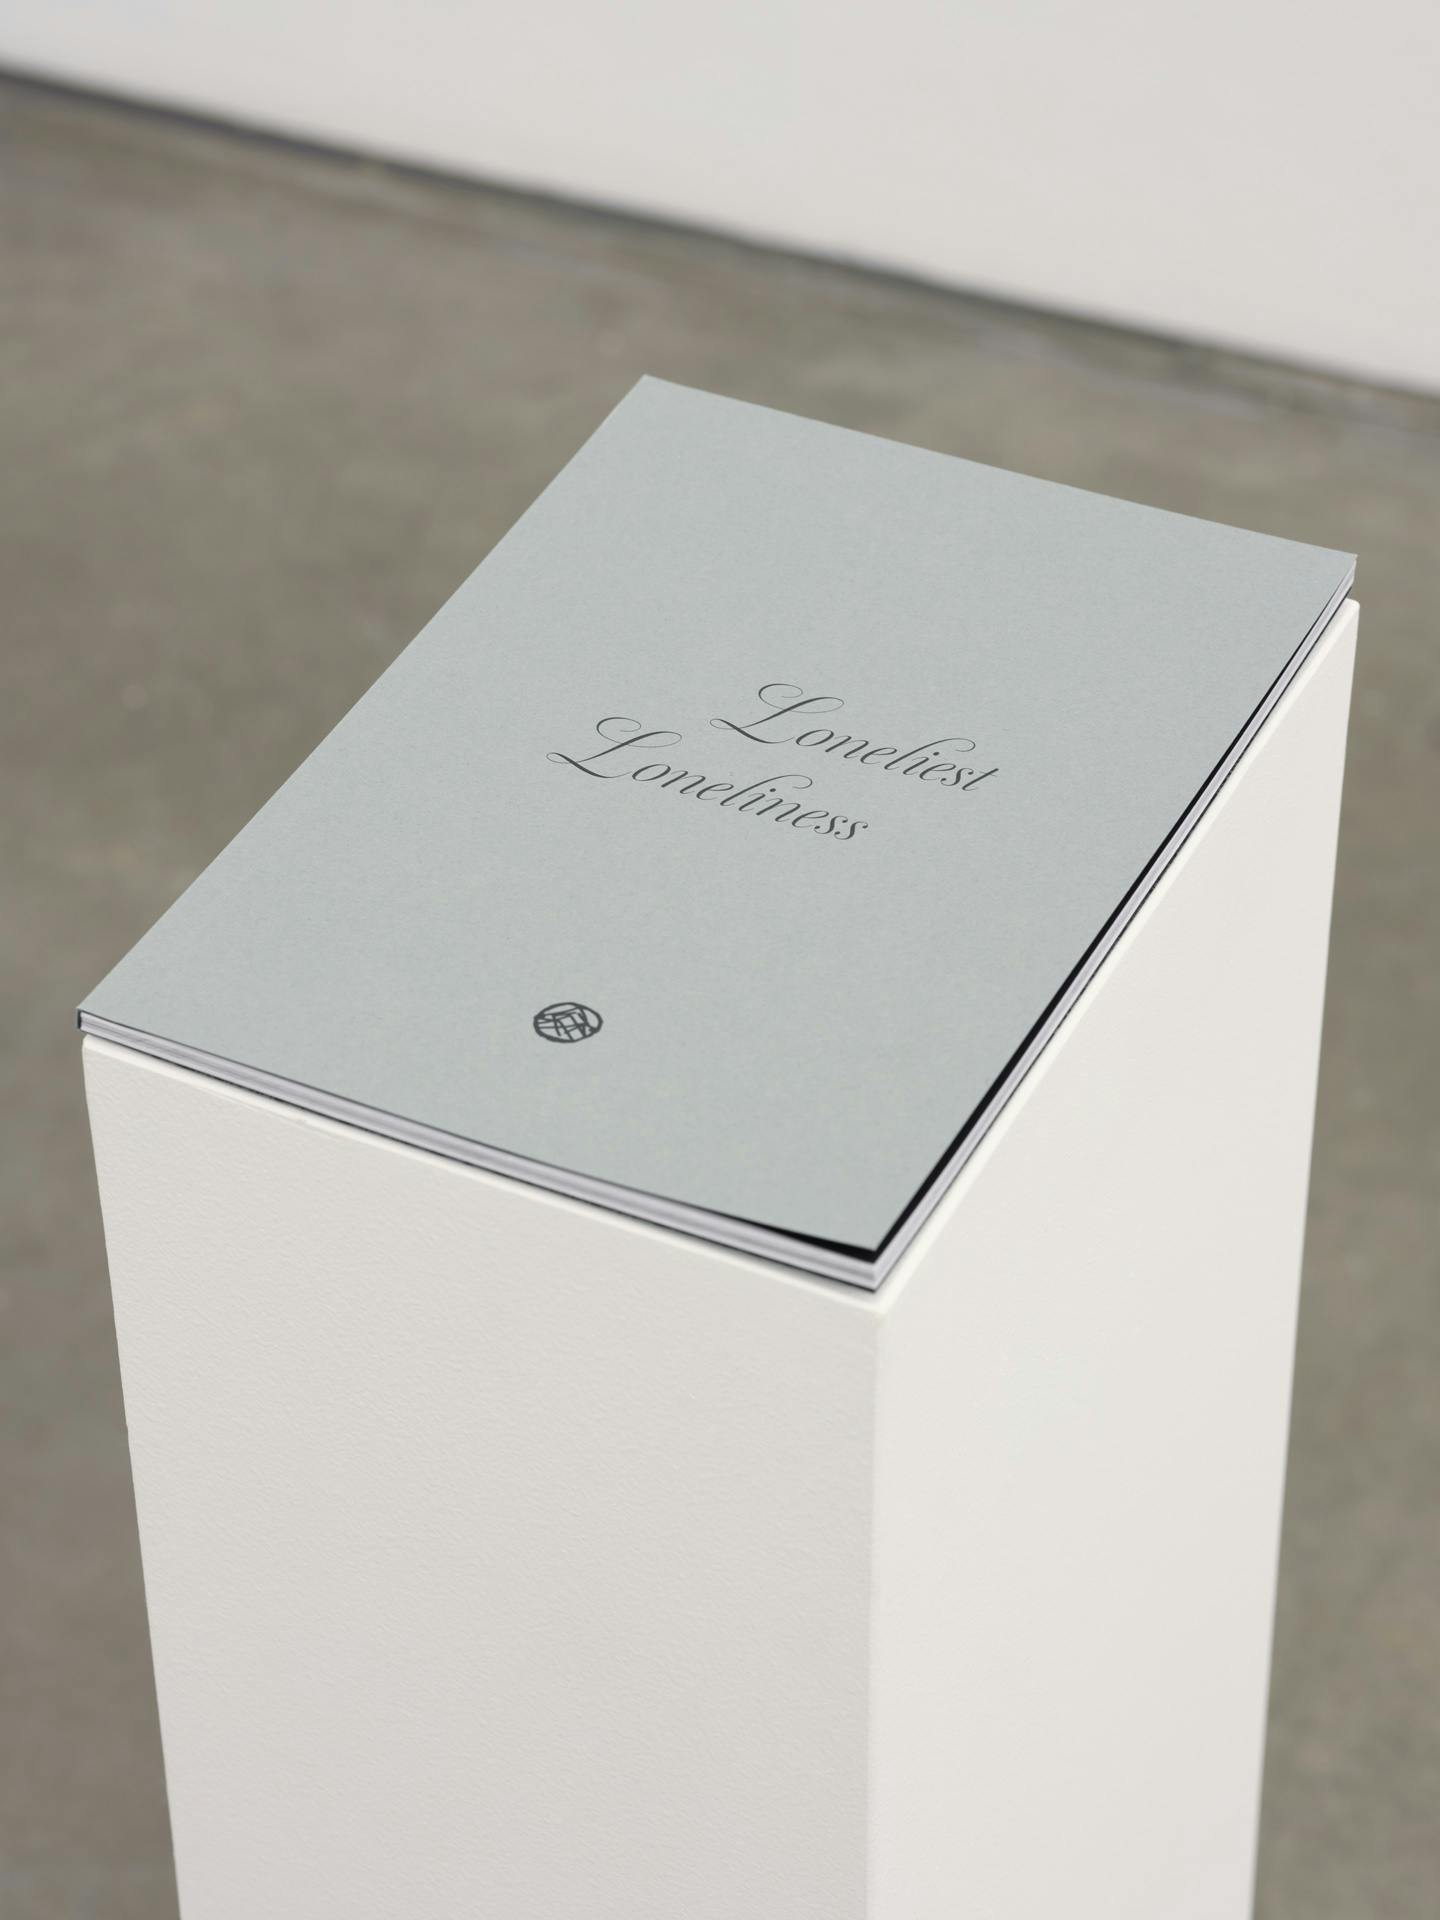 A thin artist book by Kathy Slade lying closed on a white plinth, with the title Loneliest Loneliness visible on the cover.